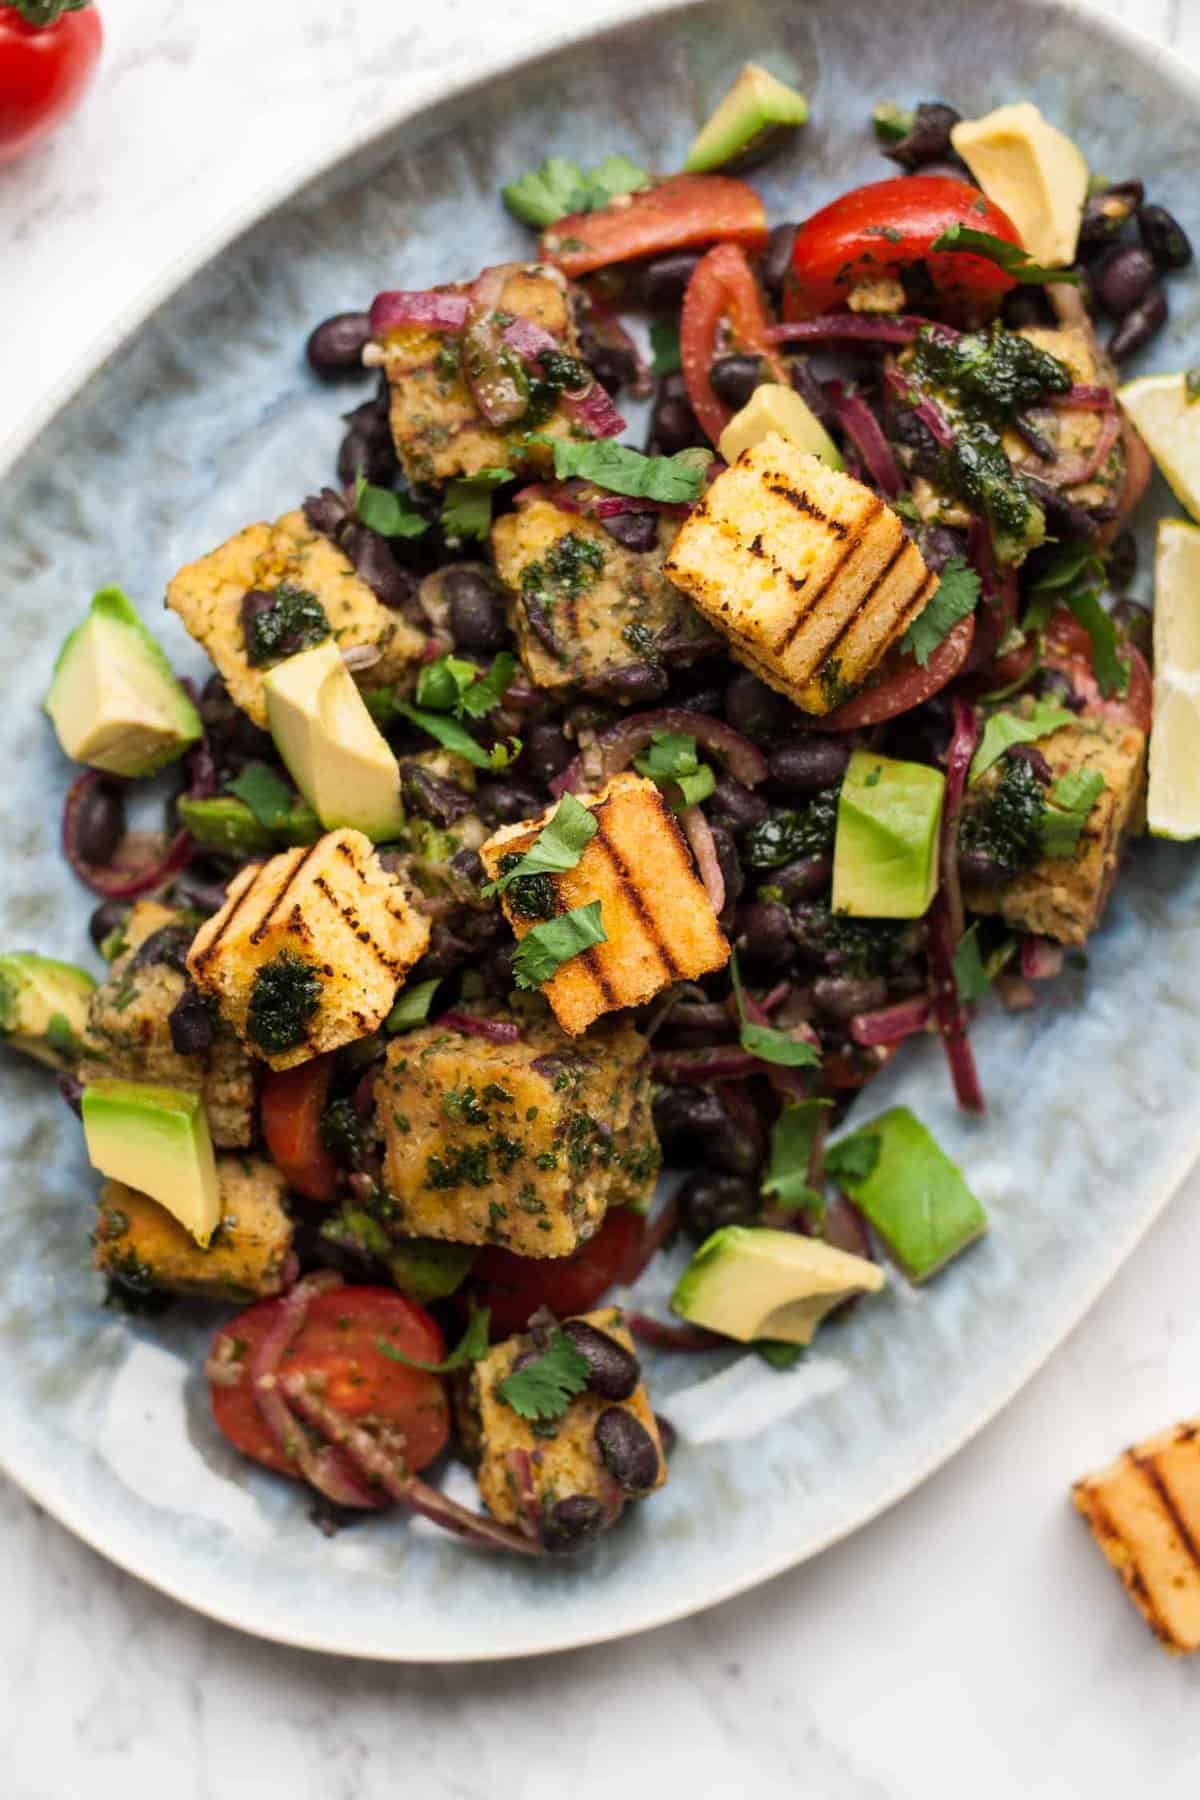 Mexican Panzanella Salad - this flavourful twist on the classic Italian bread salad is filled with black beans, avocado and cornbread and dressed with cilantro oil! | eatloveeats.com